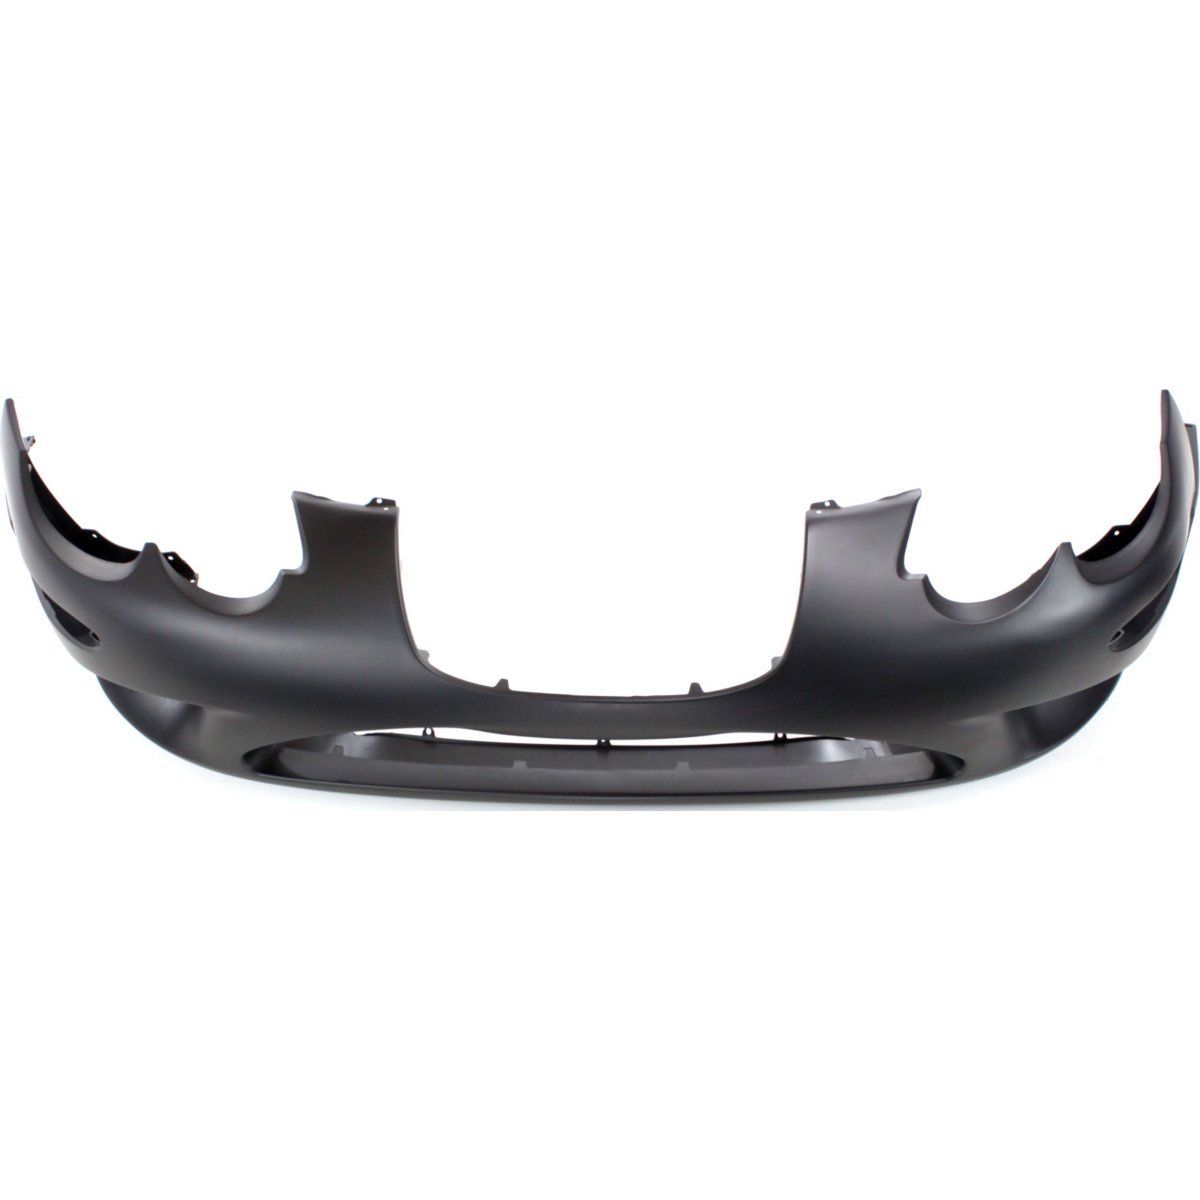 1999-2004 CHRYSLER 300M Front Bumper Cover Painted to Match